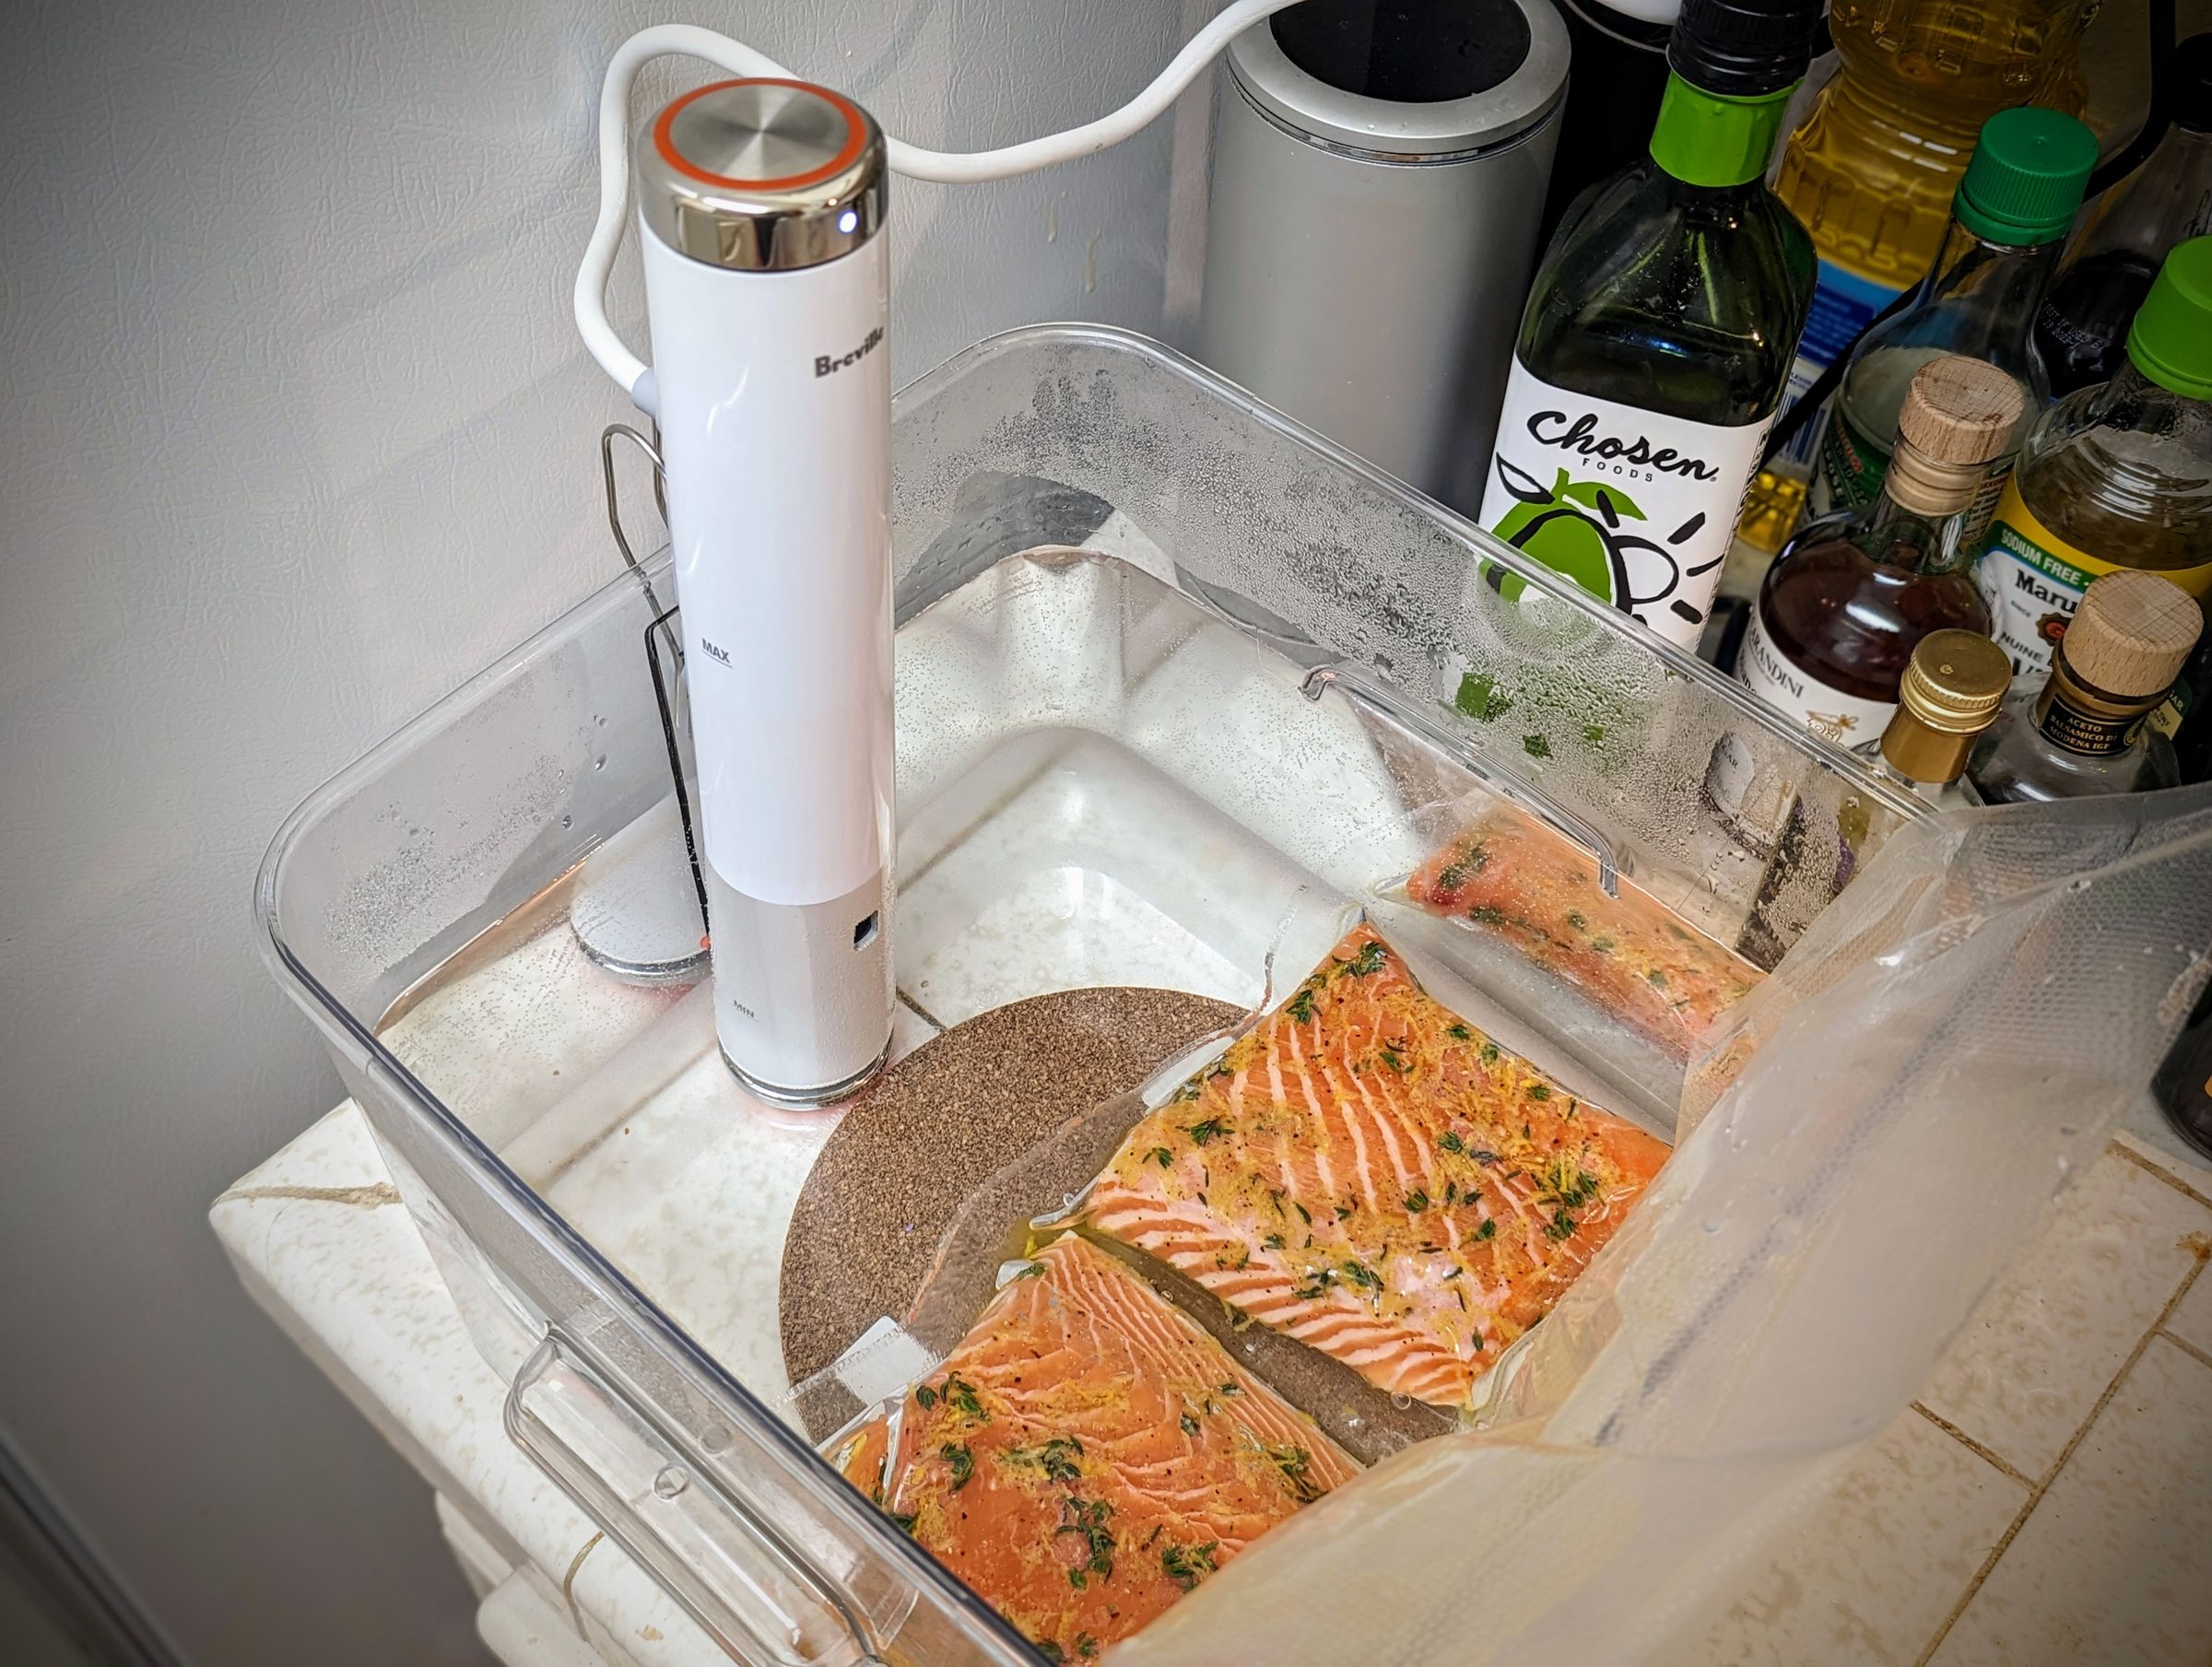 The Breville Joule Turbo cooking salmon.